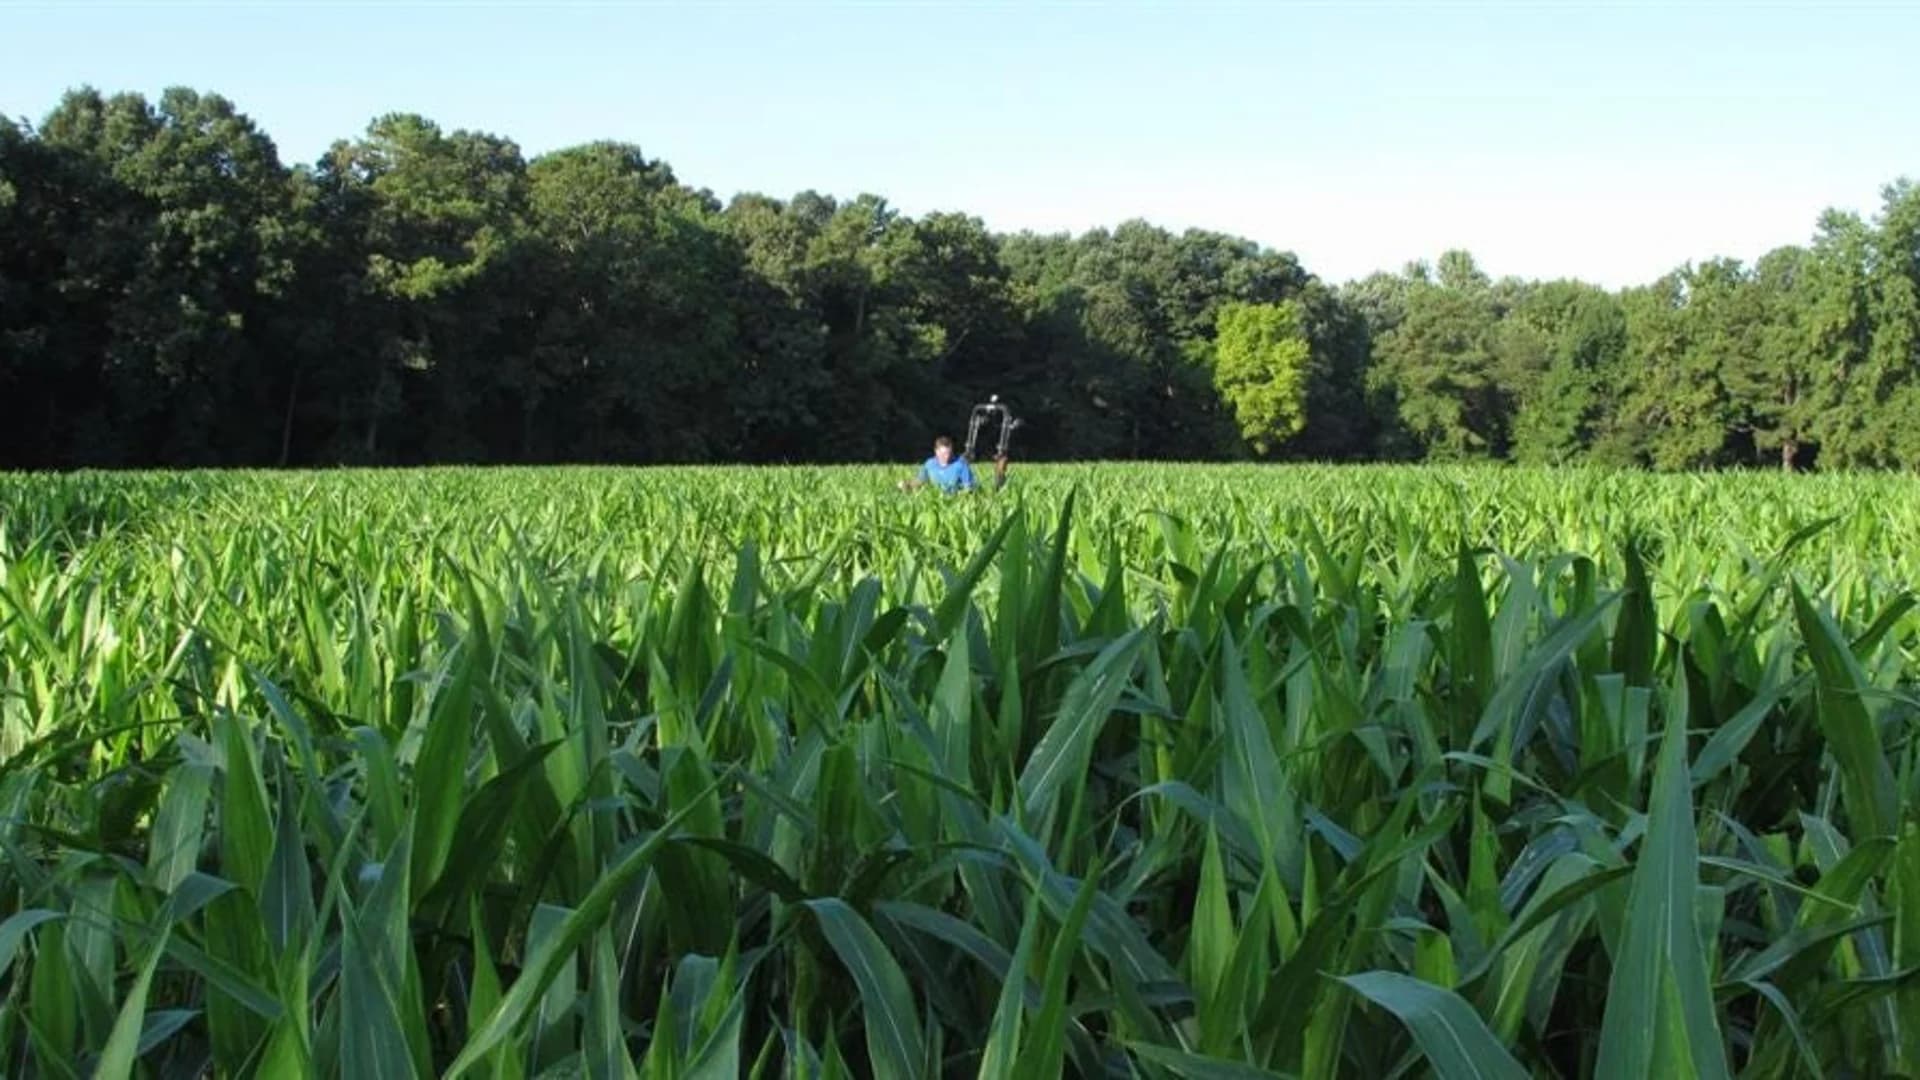 Guide: Get lost in these cornfield mazes around New Jersey 